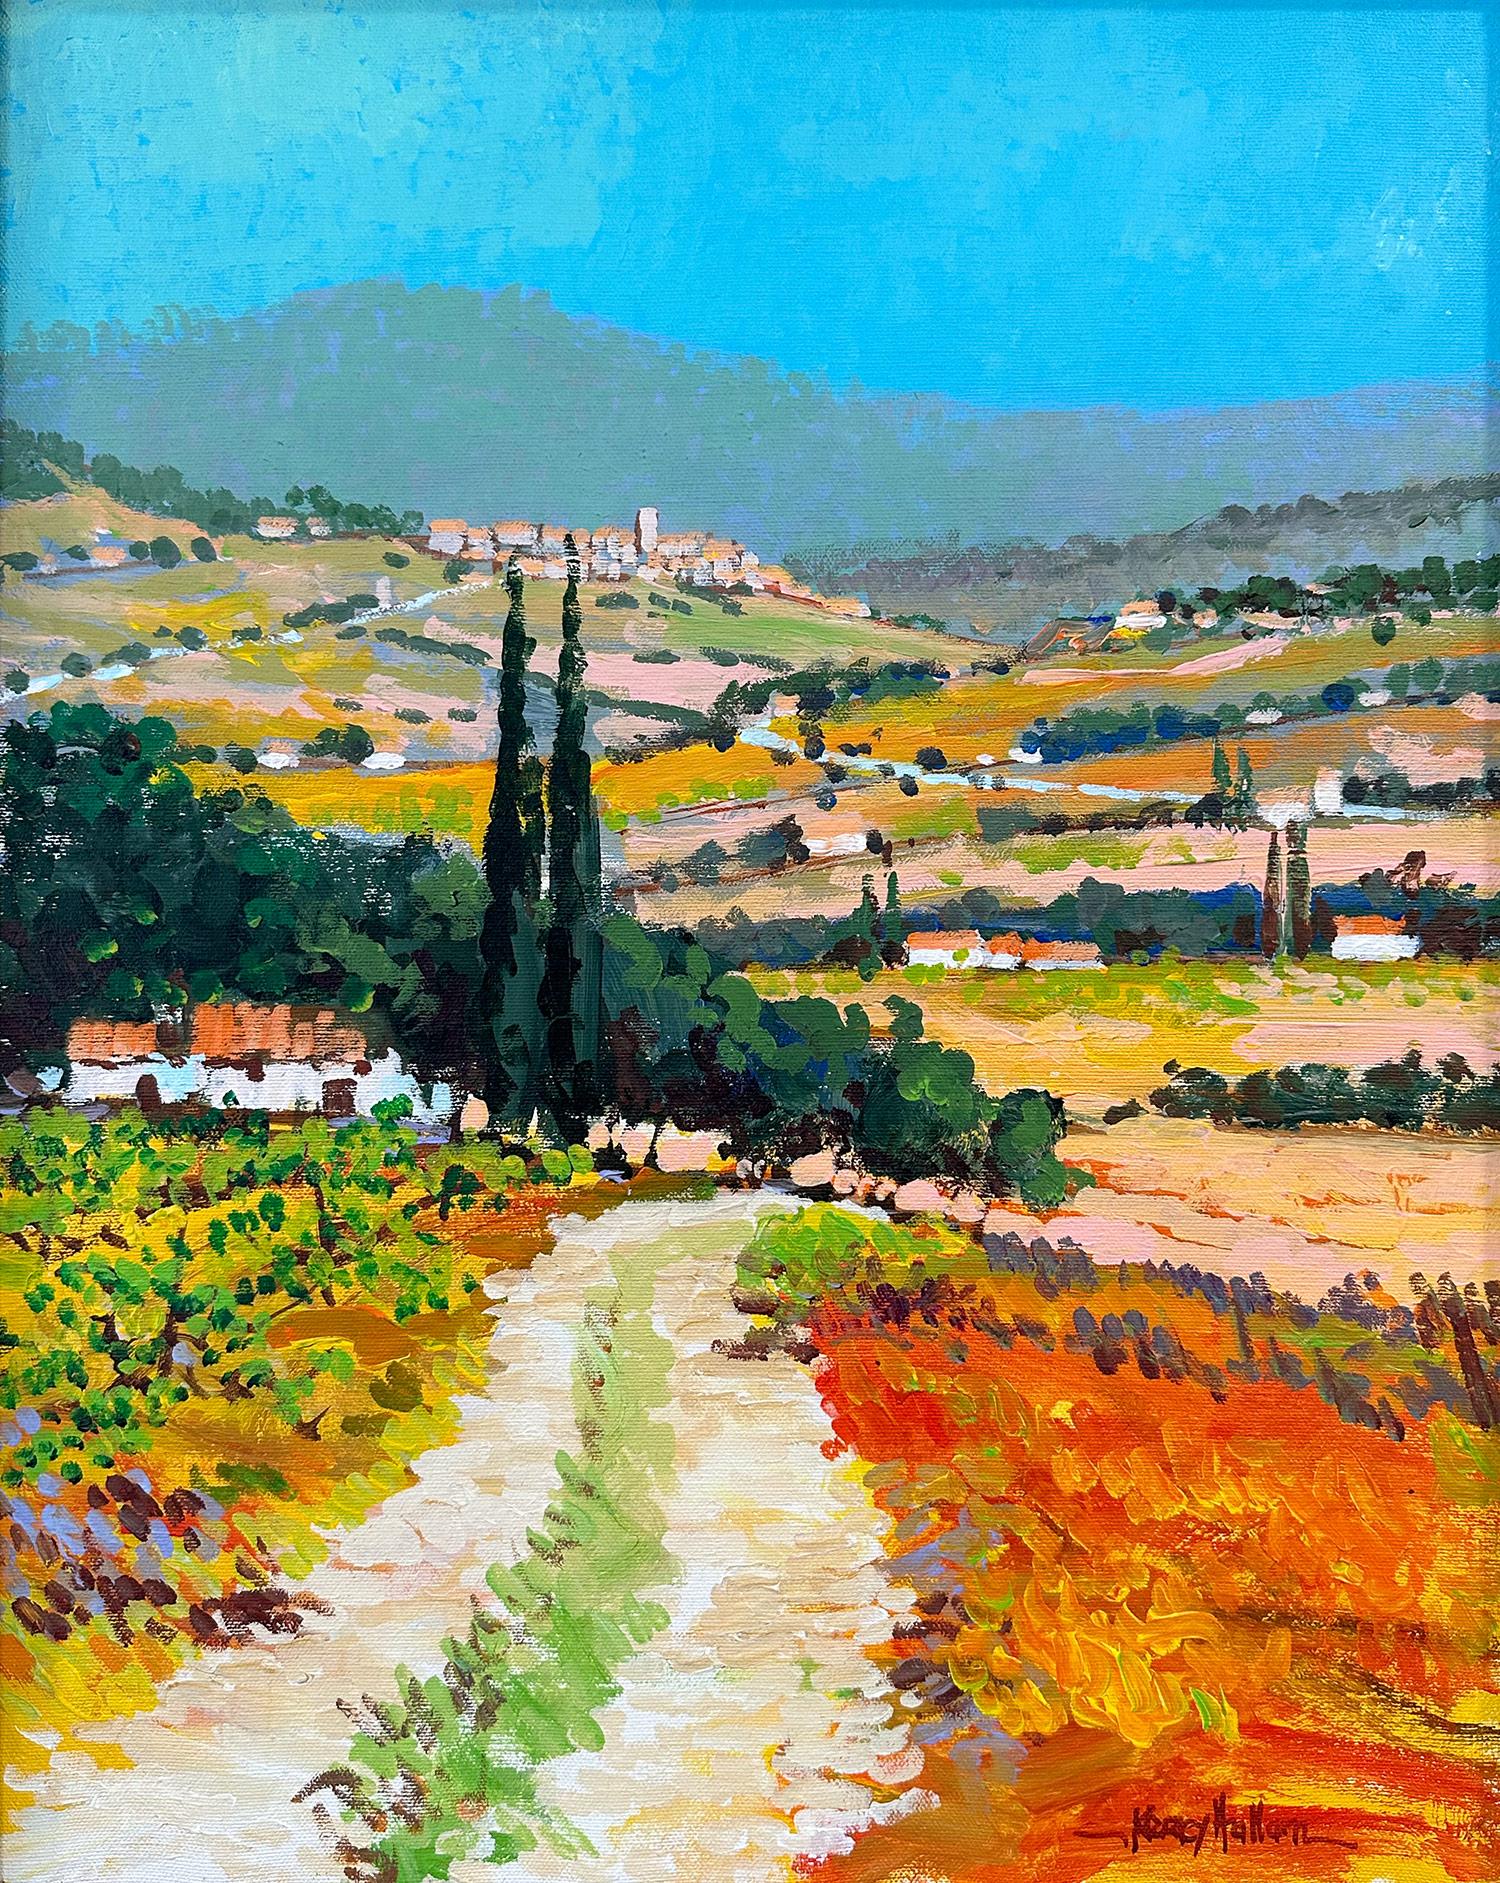 The result is a refreshing view from his Tuscany scenes. The Italian pathway is depicted with much vibrancy and energy as the trees and mountains are depicted loosely in the background under an almost turquoise skyline. We are drawn into the view